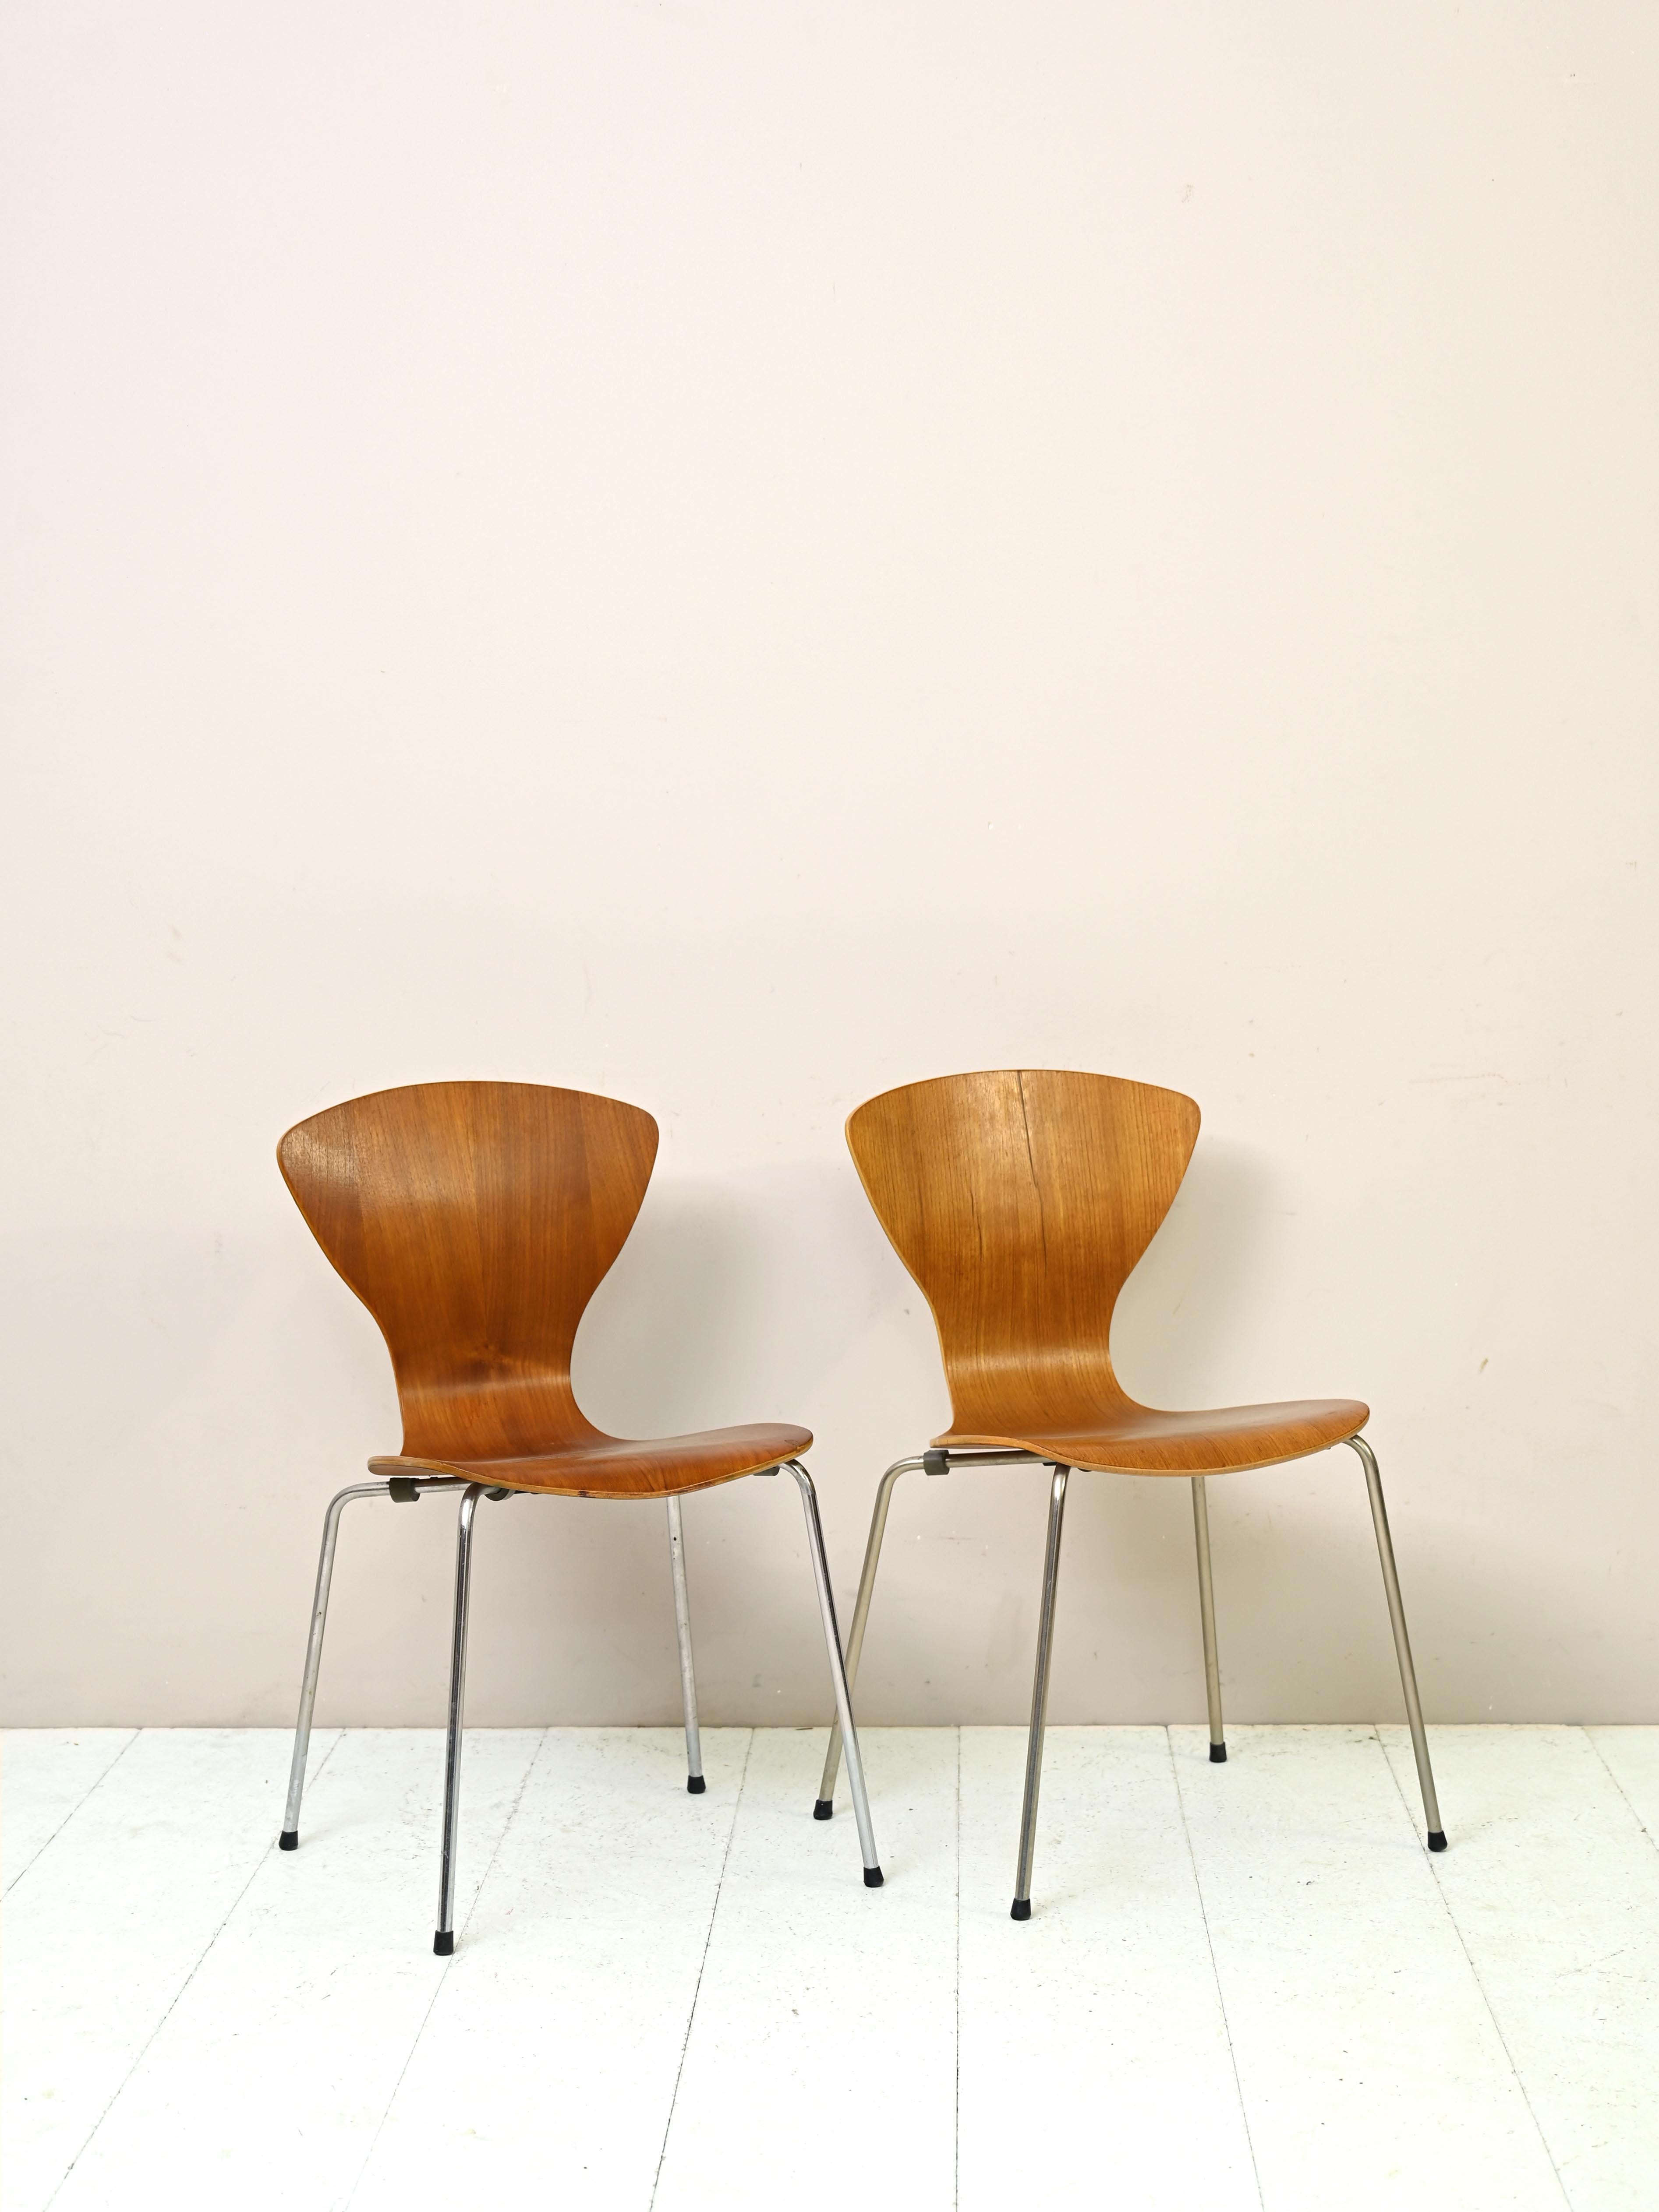 Original vintage 1960s chairs.

These elegant, minimalist chairs feature metal legs and a seat with a contoured teak back. 
The curvy lines and golden color of the teak make them timelessly beautiful Scandinavian design pieces.
Ideal for a